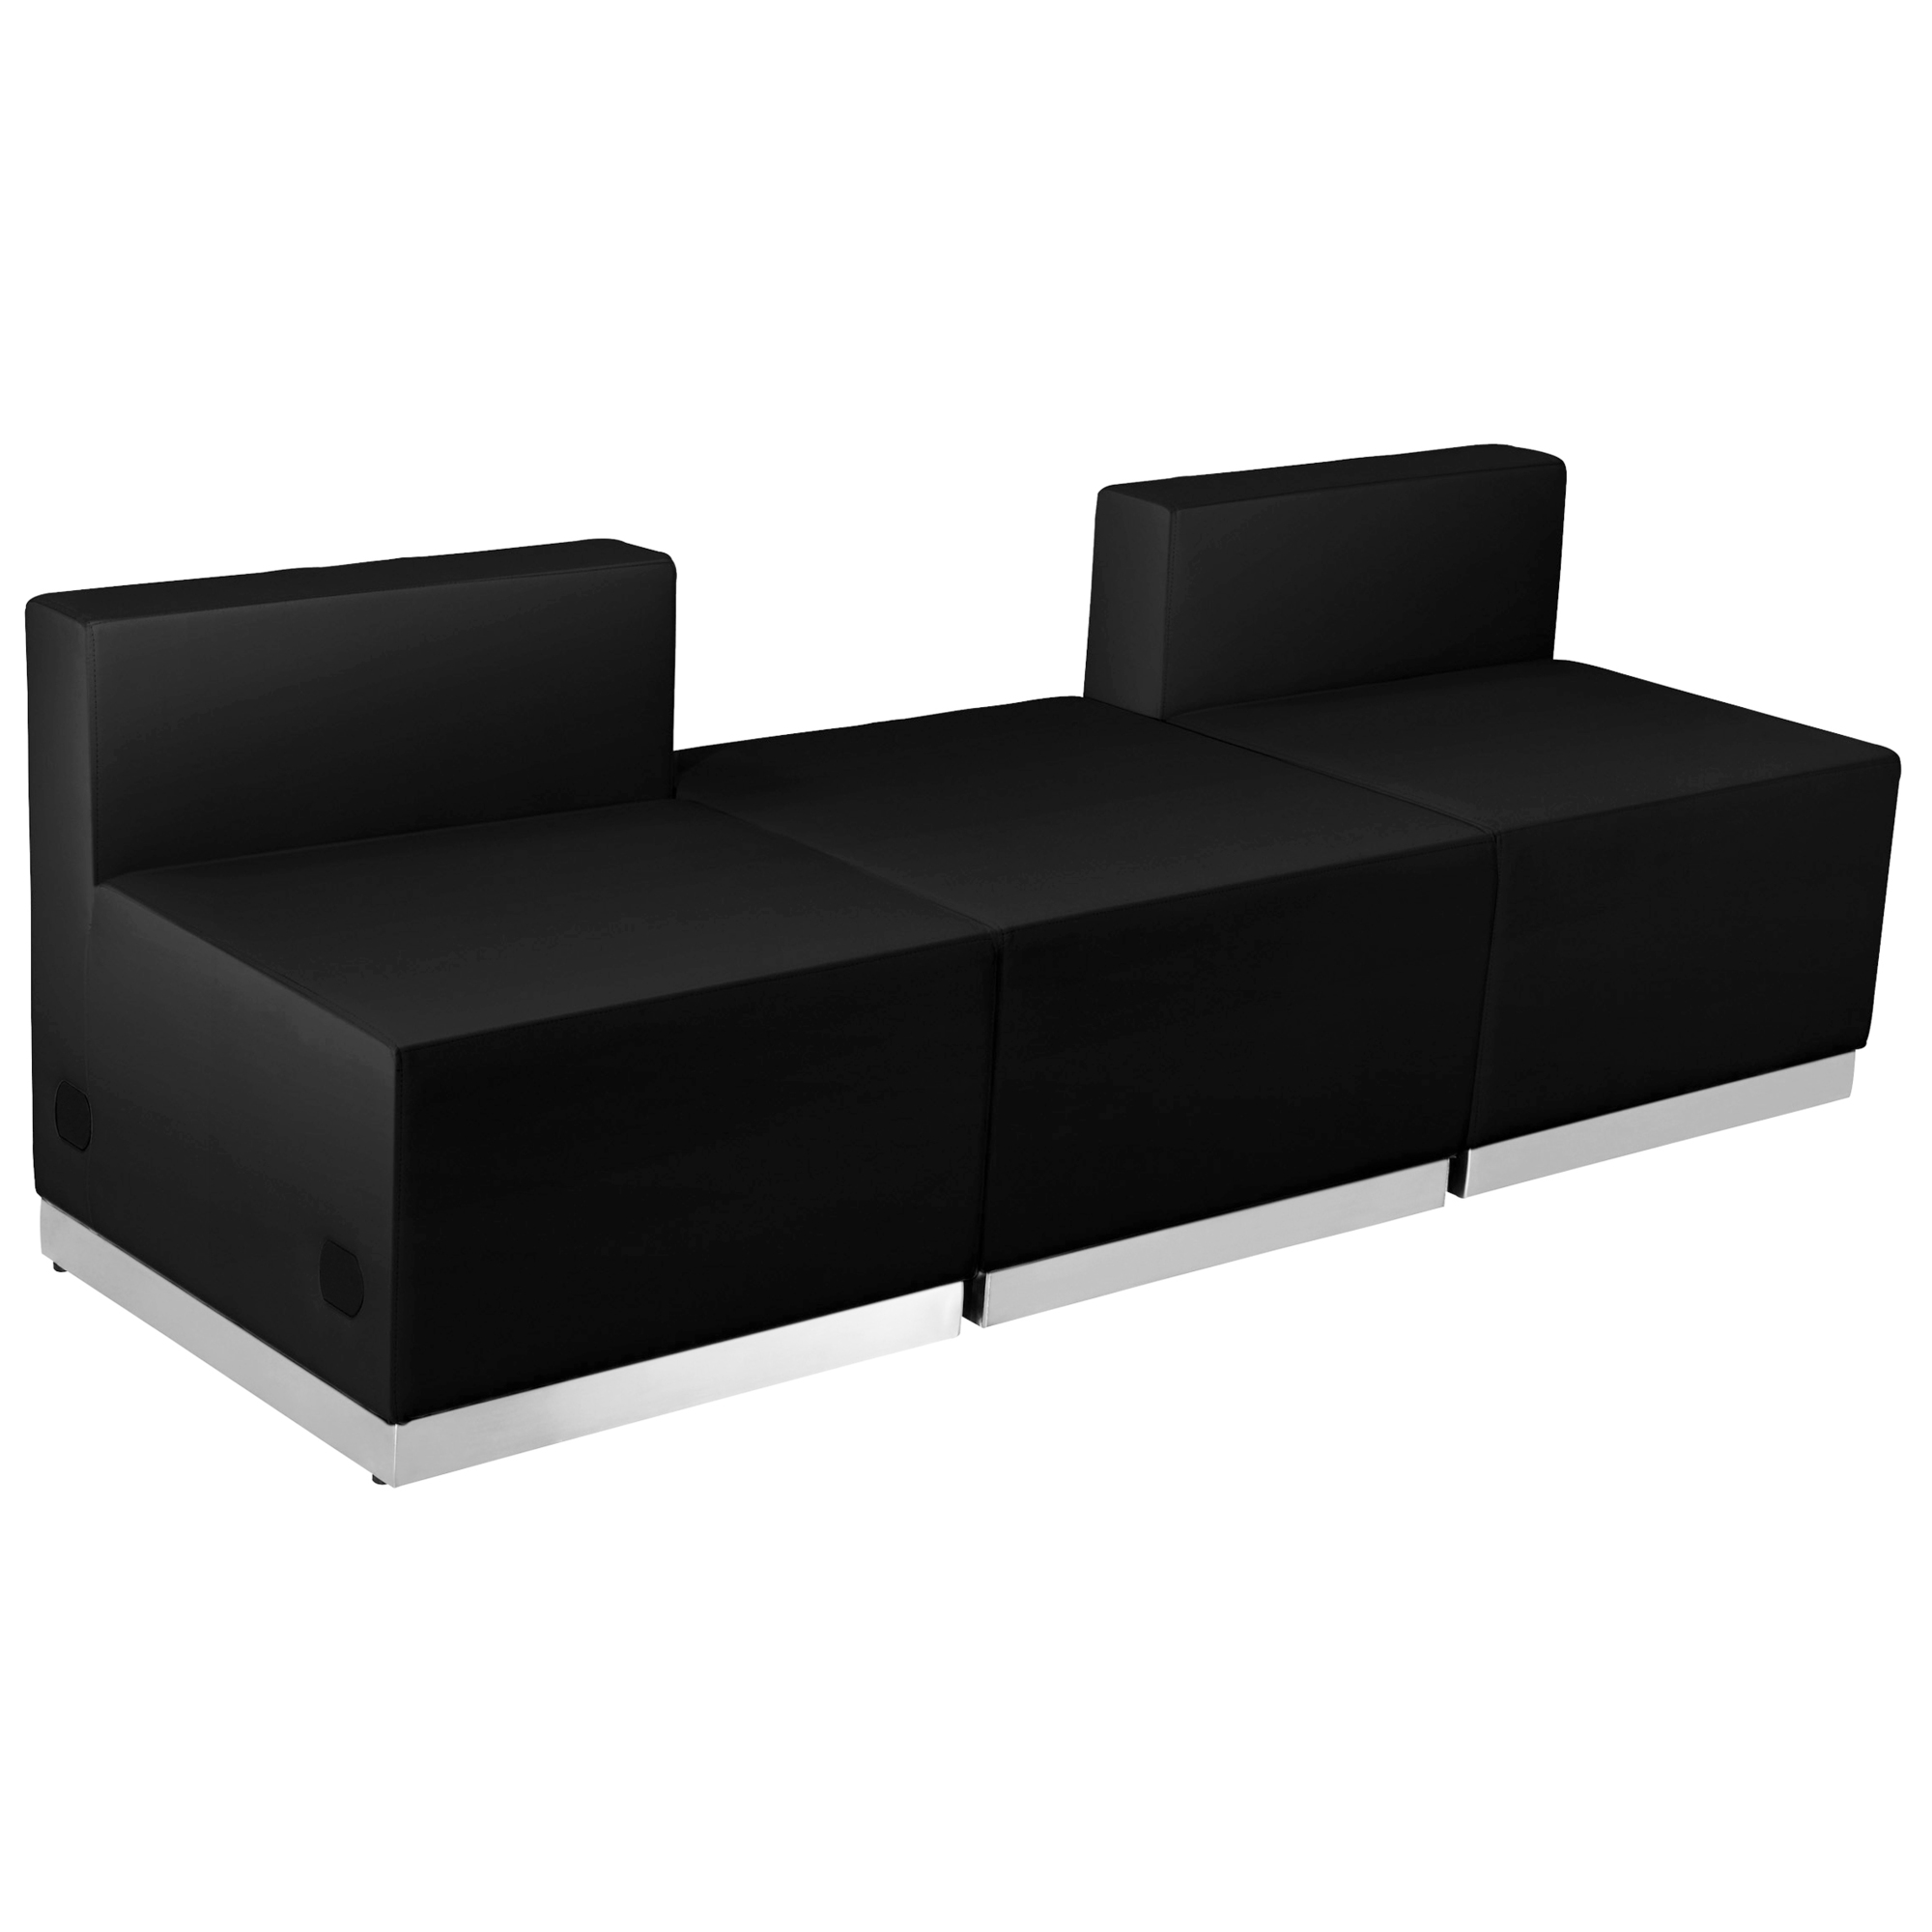 Flash Furniture, 3 PC Black LeatherSoft Reception Configuration, Primary Color Black, Included (qty.) 3, Model ZB803670SBK